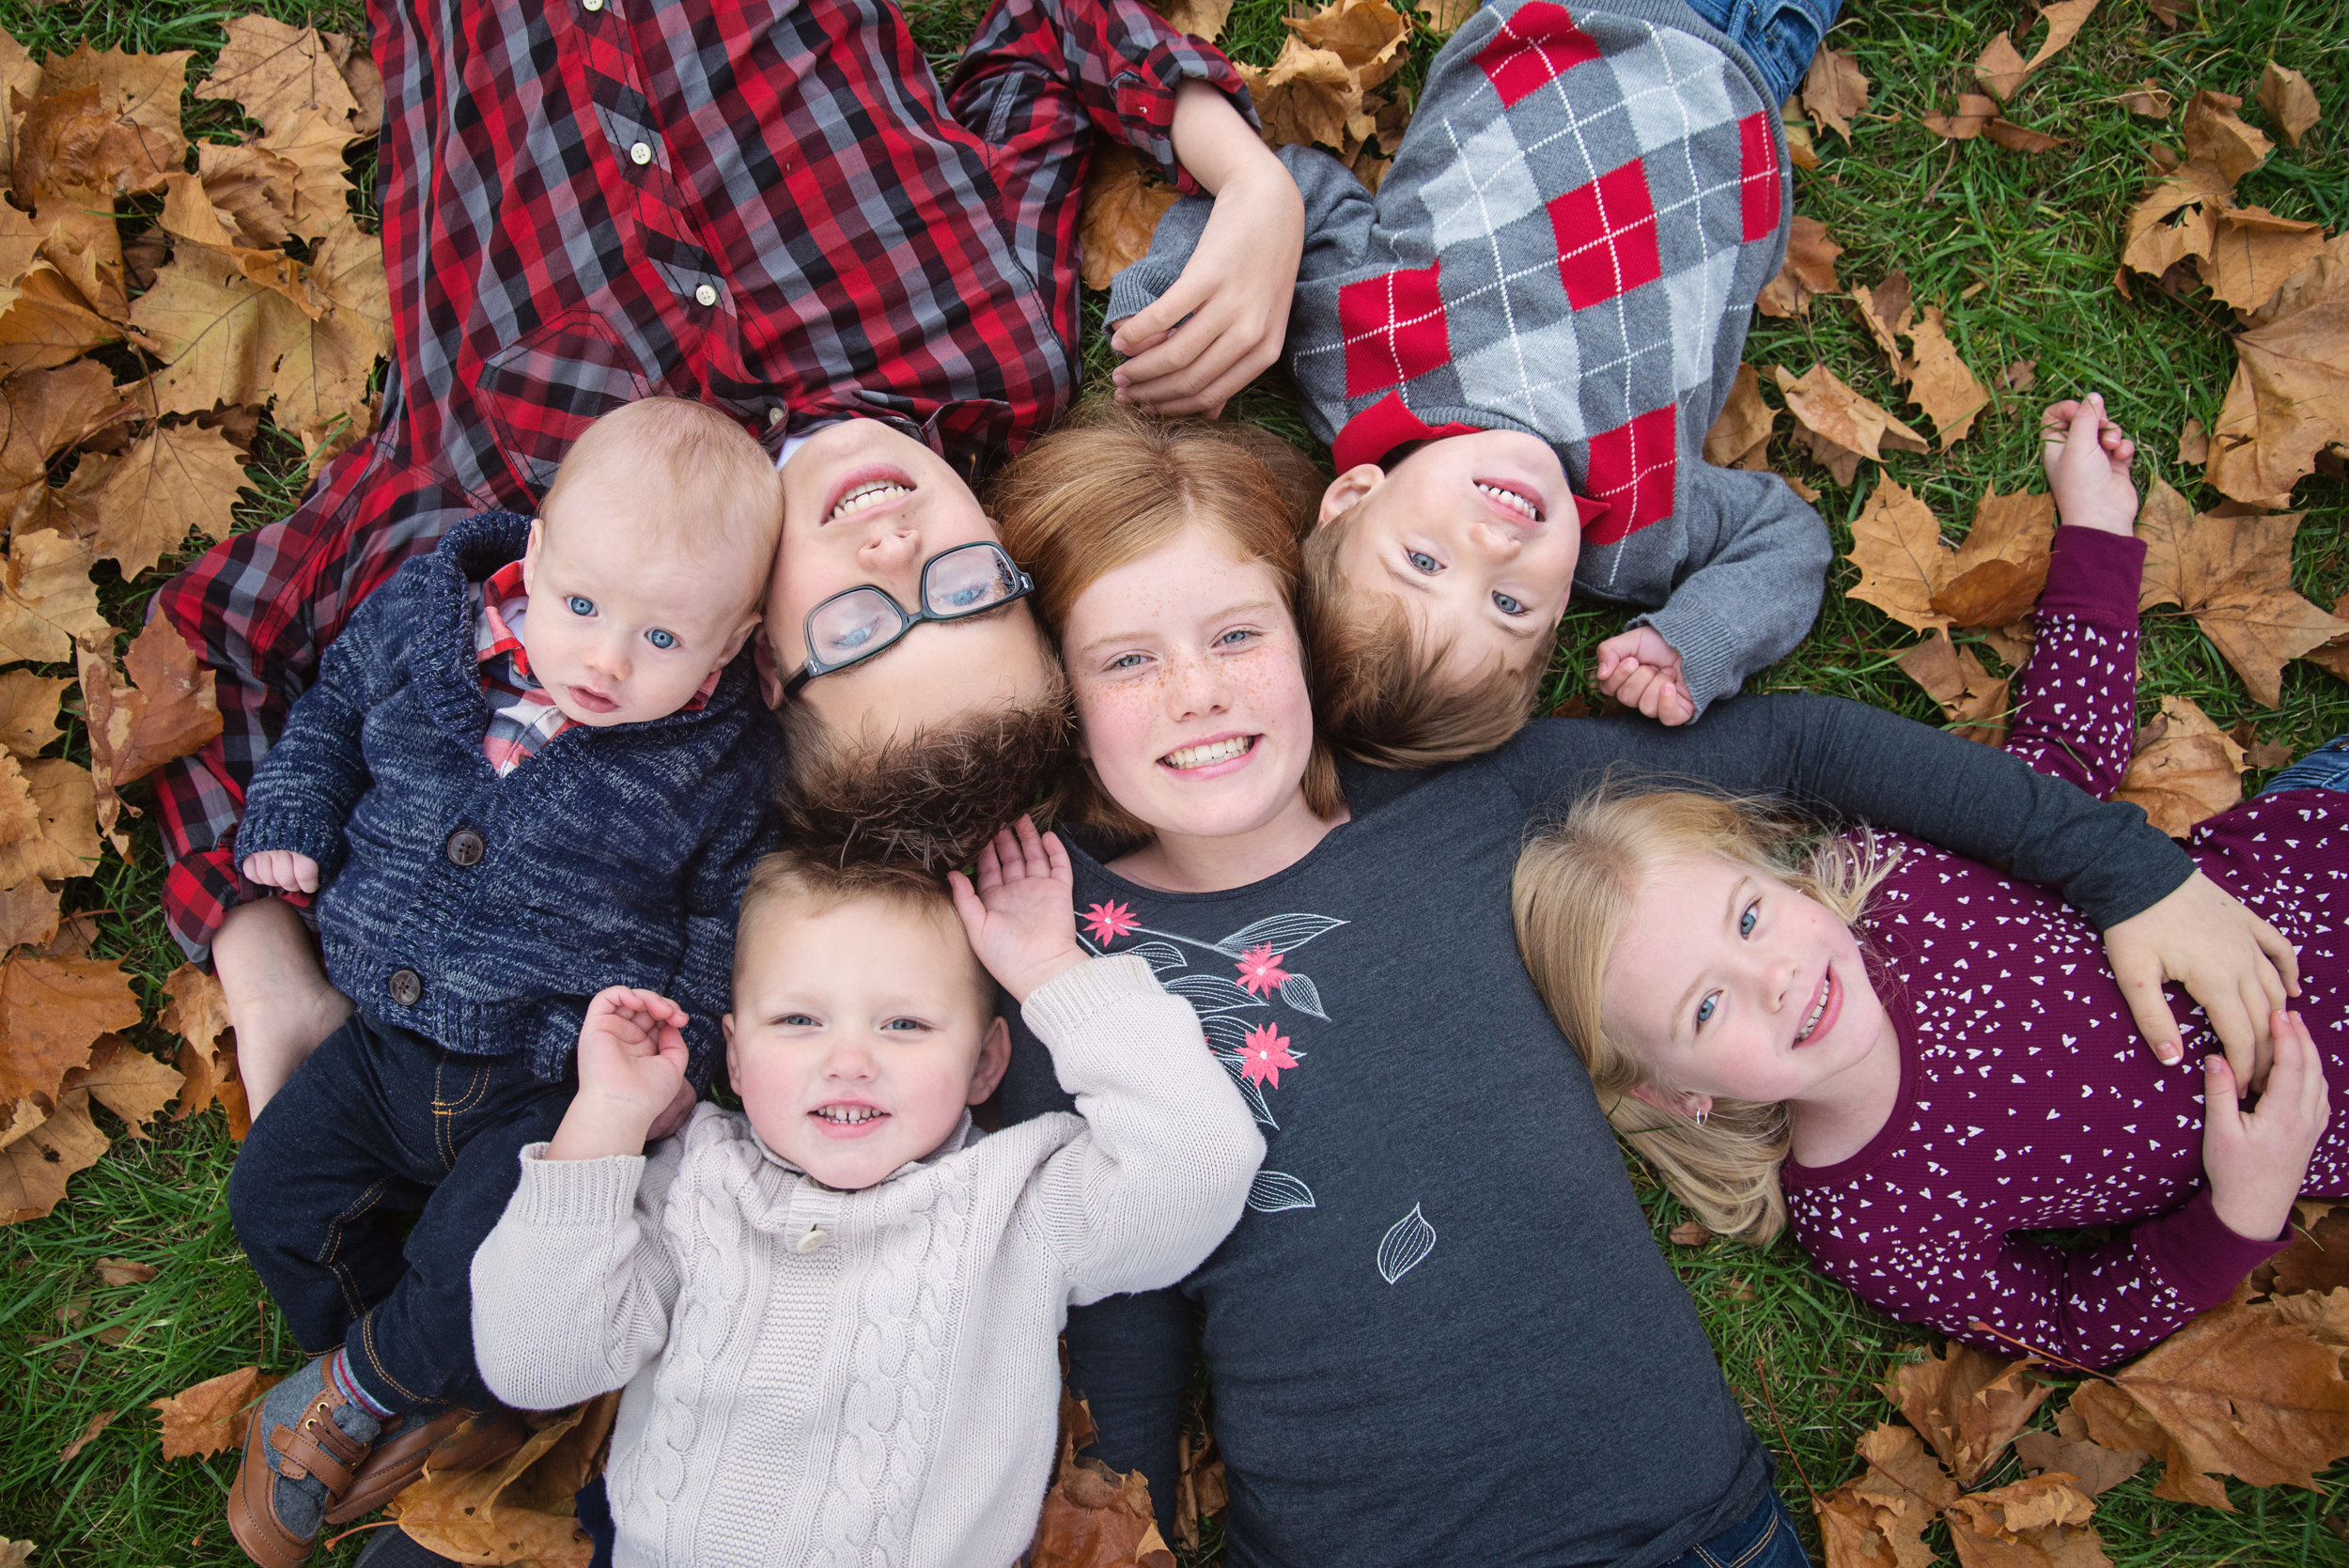 st-louis-family-photographer-six-kids-laying-in-leaves-looking-up-with-heads-together.jpg